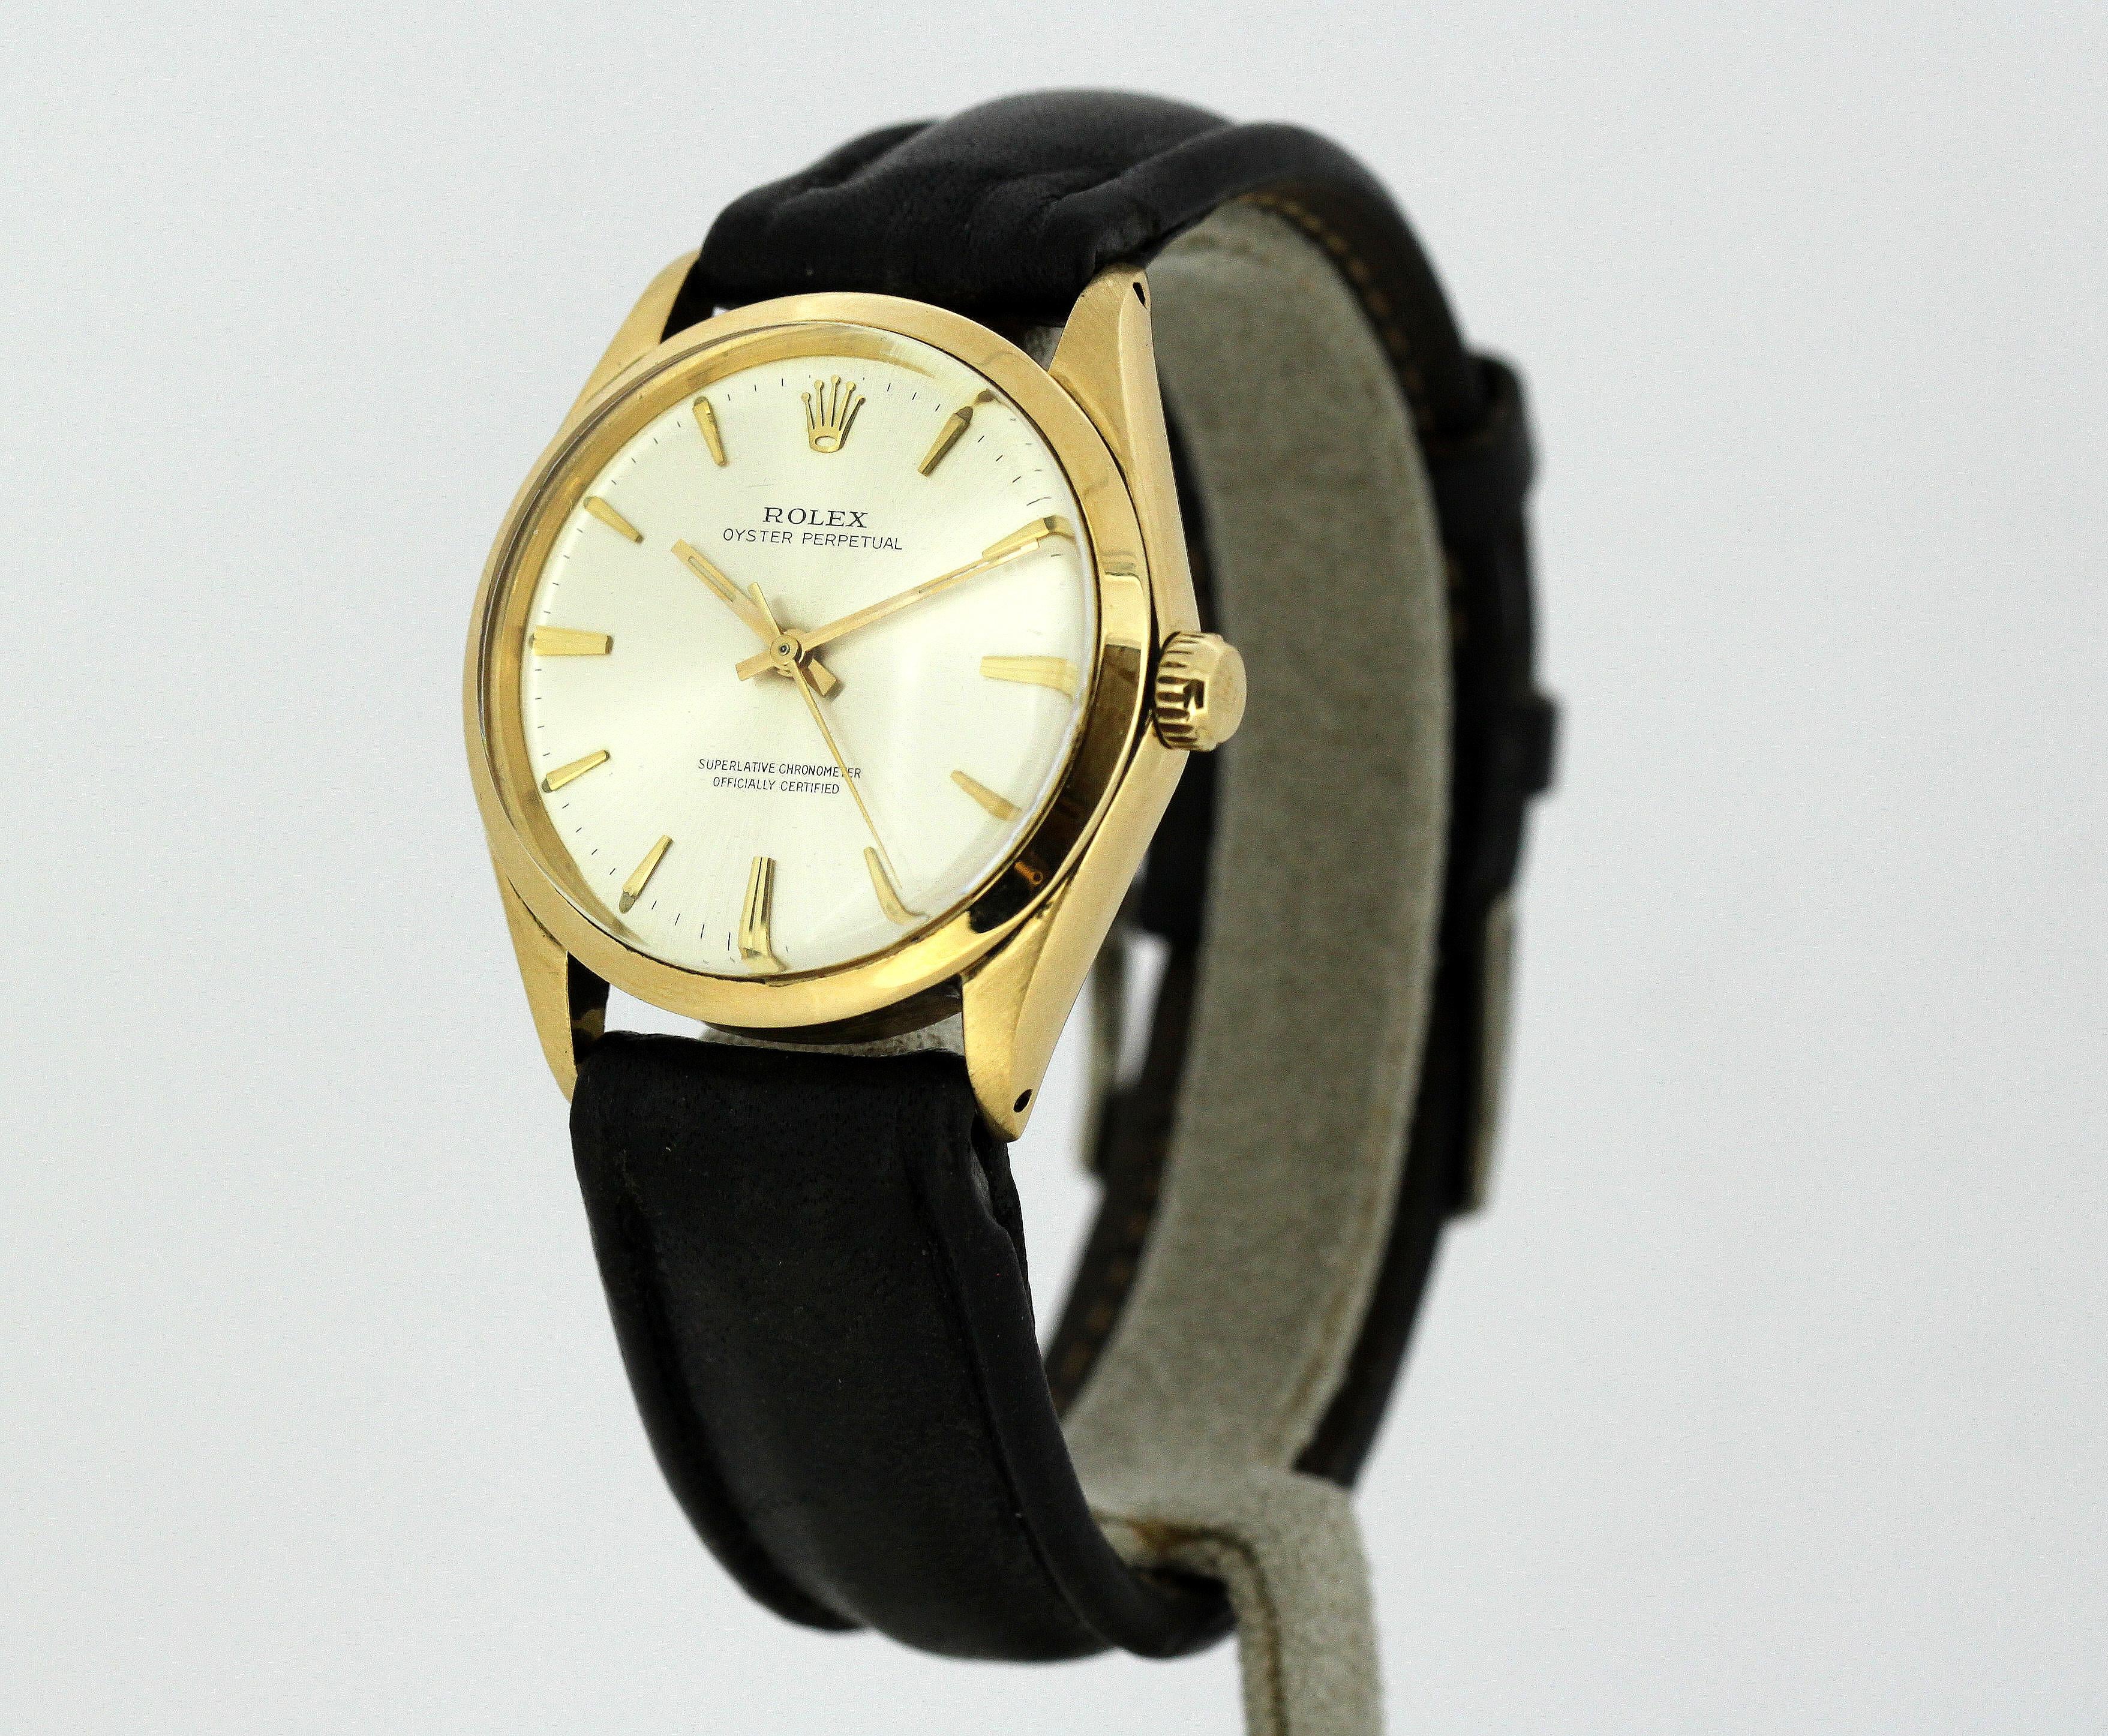 Rolex - Oyster Perpetual - 1002 - Men - 1970's

Gender:	Men
Model : Oyster Perpetual
Case Diameter : 34 mm
Movement: Automatic
Watchband Material: Leather
Case material : 18K Gold
Display Type:	Analogue	
Age: 1970's
Dial: (See Photos)
Hands :